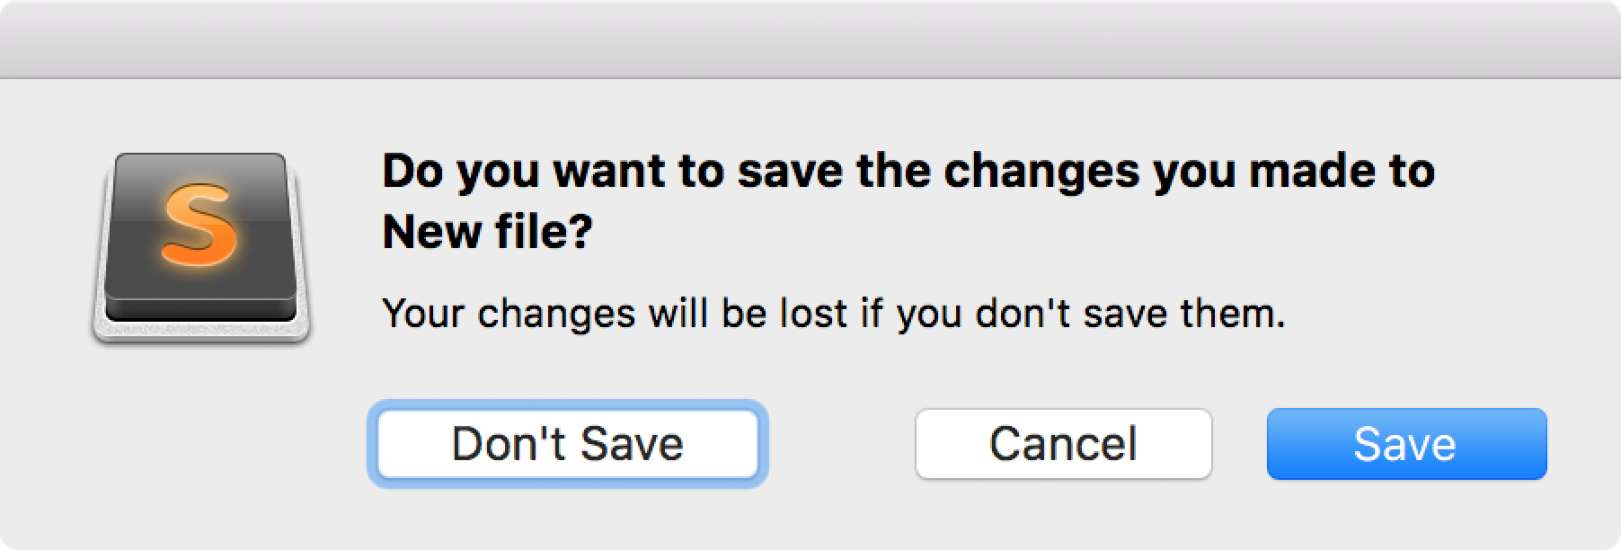 MacOS dialog box that is asking the user if they want to save changes to the new file.